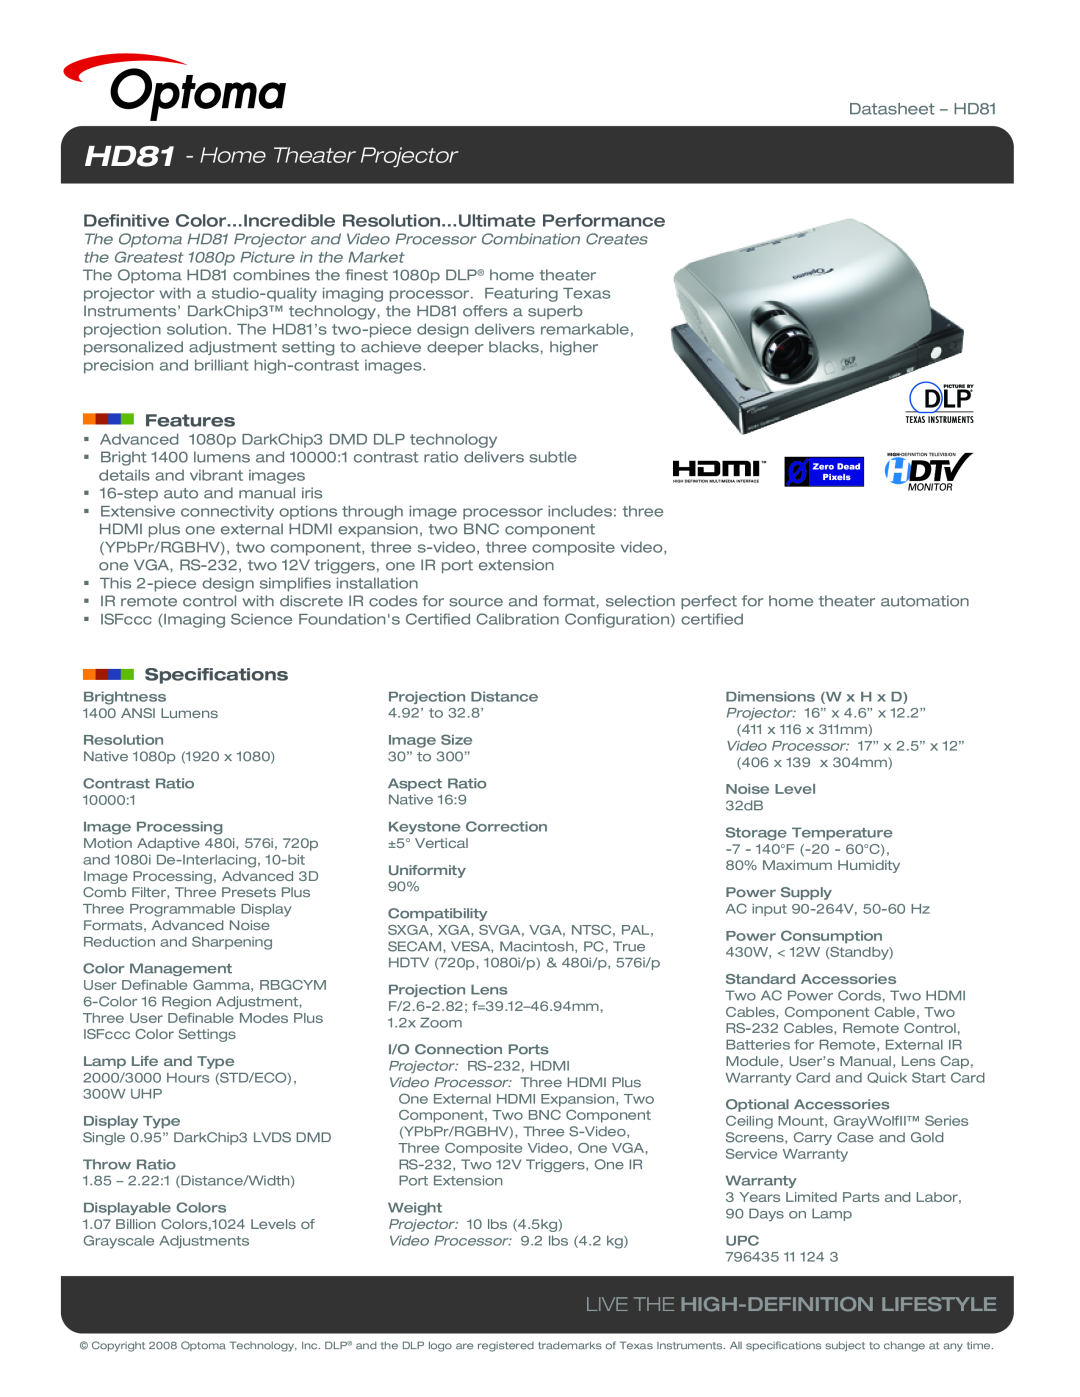 Optoma Technology specifications HD81 - Home Theater Projector, Live The High-Definition Lifestyle, Features 